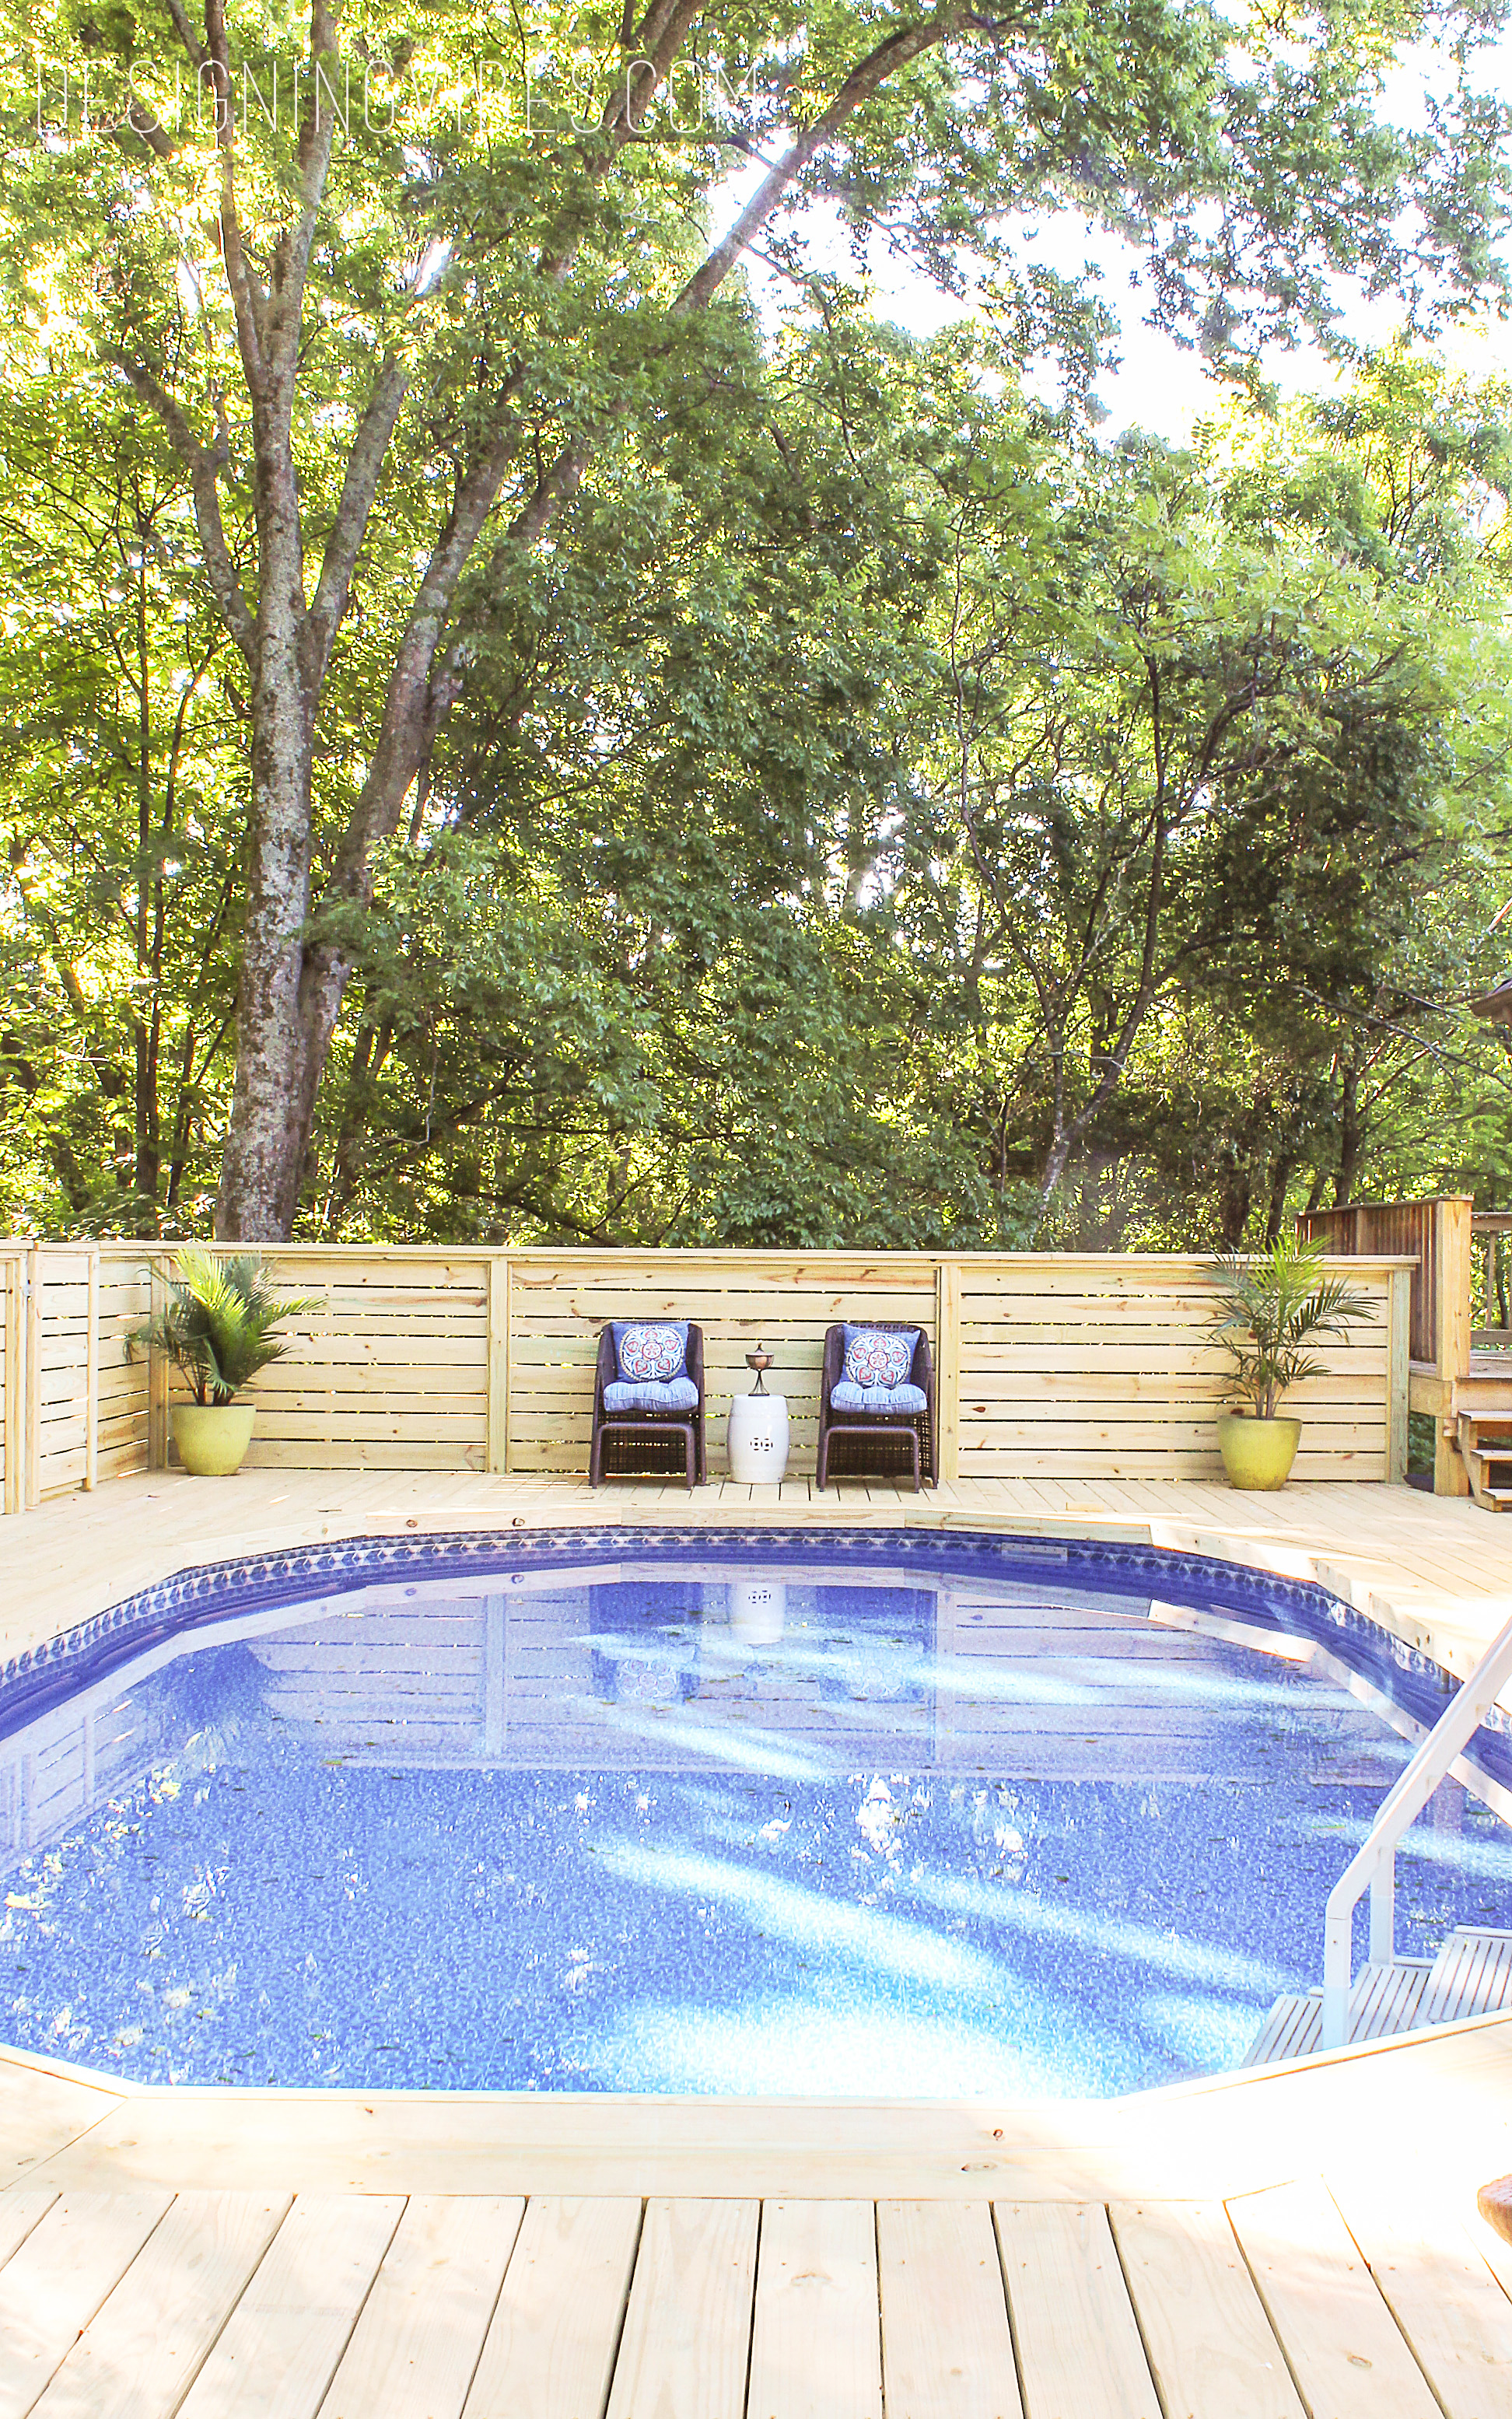 How To Make An Above Ground Pool Look Inground - Pool Deck Ideas